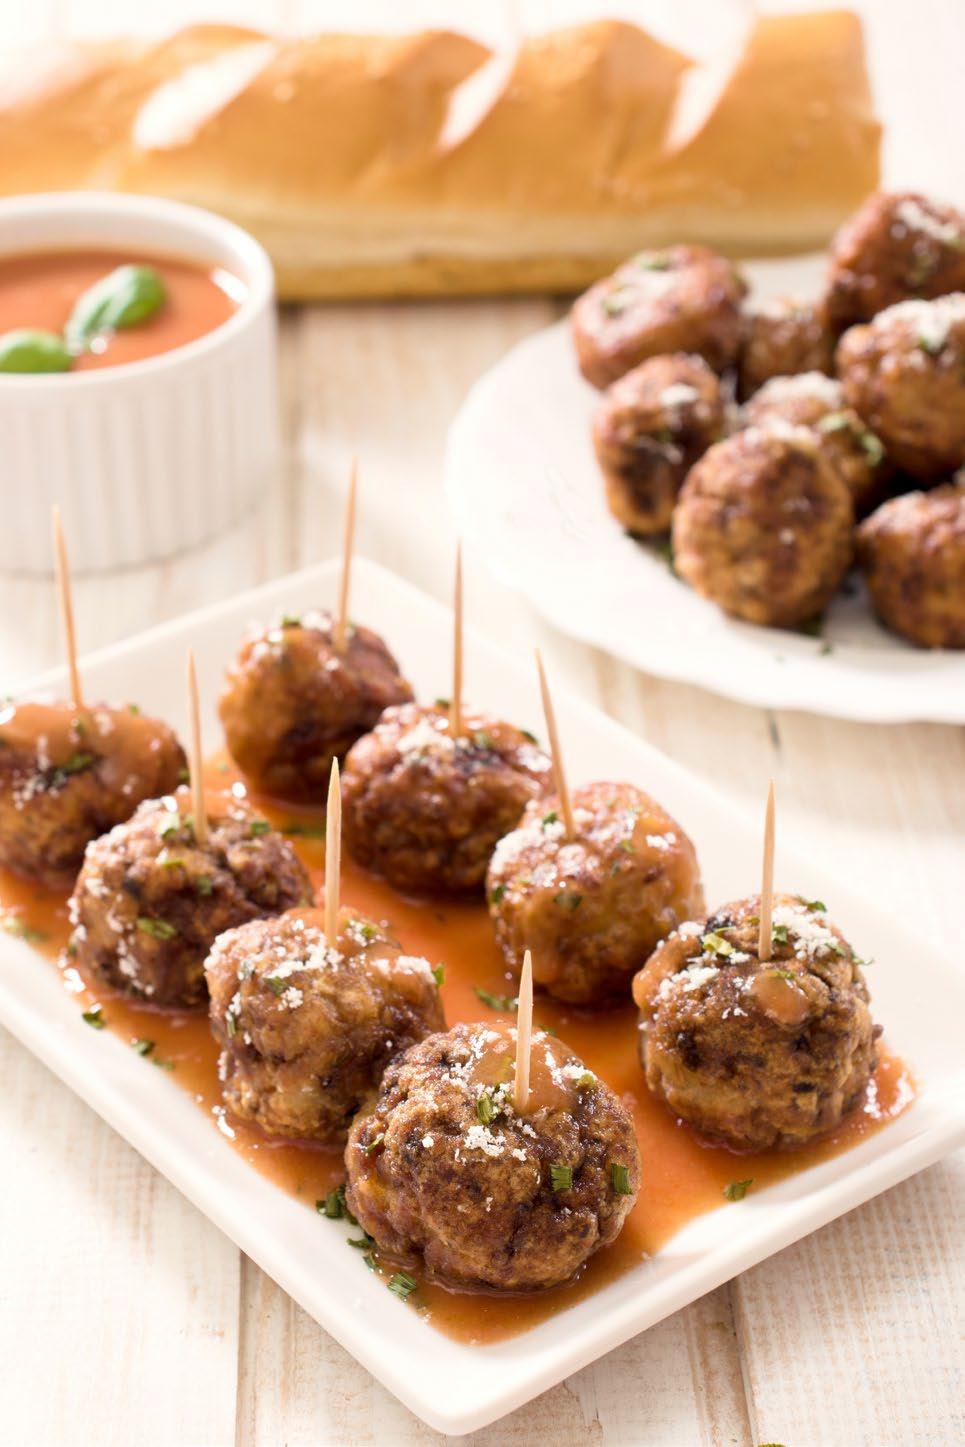 With wet hands, prepare 24 meatballs with the chicken mixture. Heat 1 tablespoon of oil in a large skillet over medium heat.